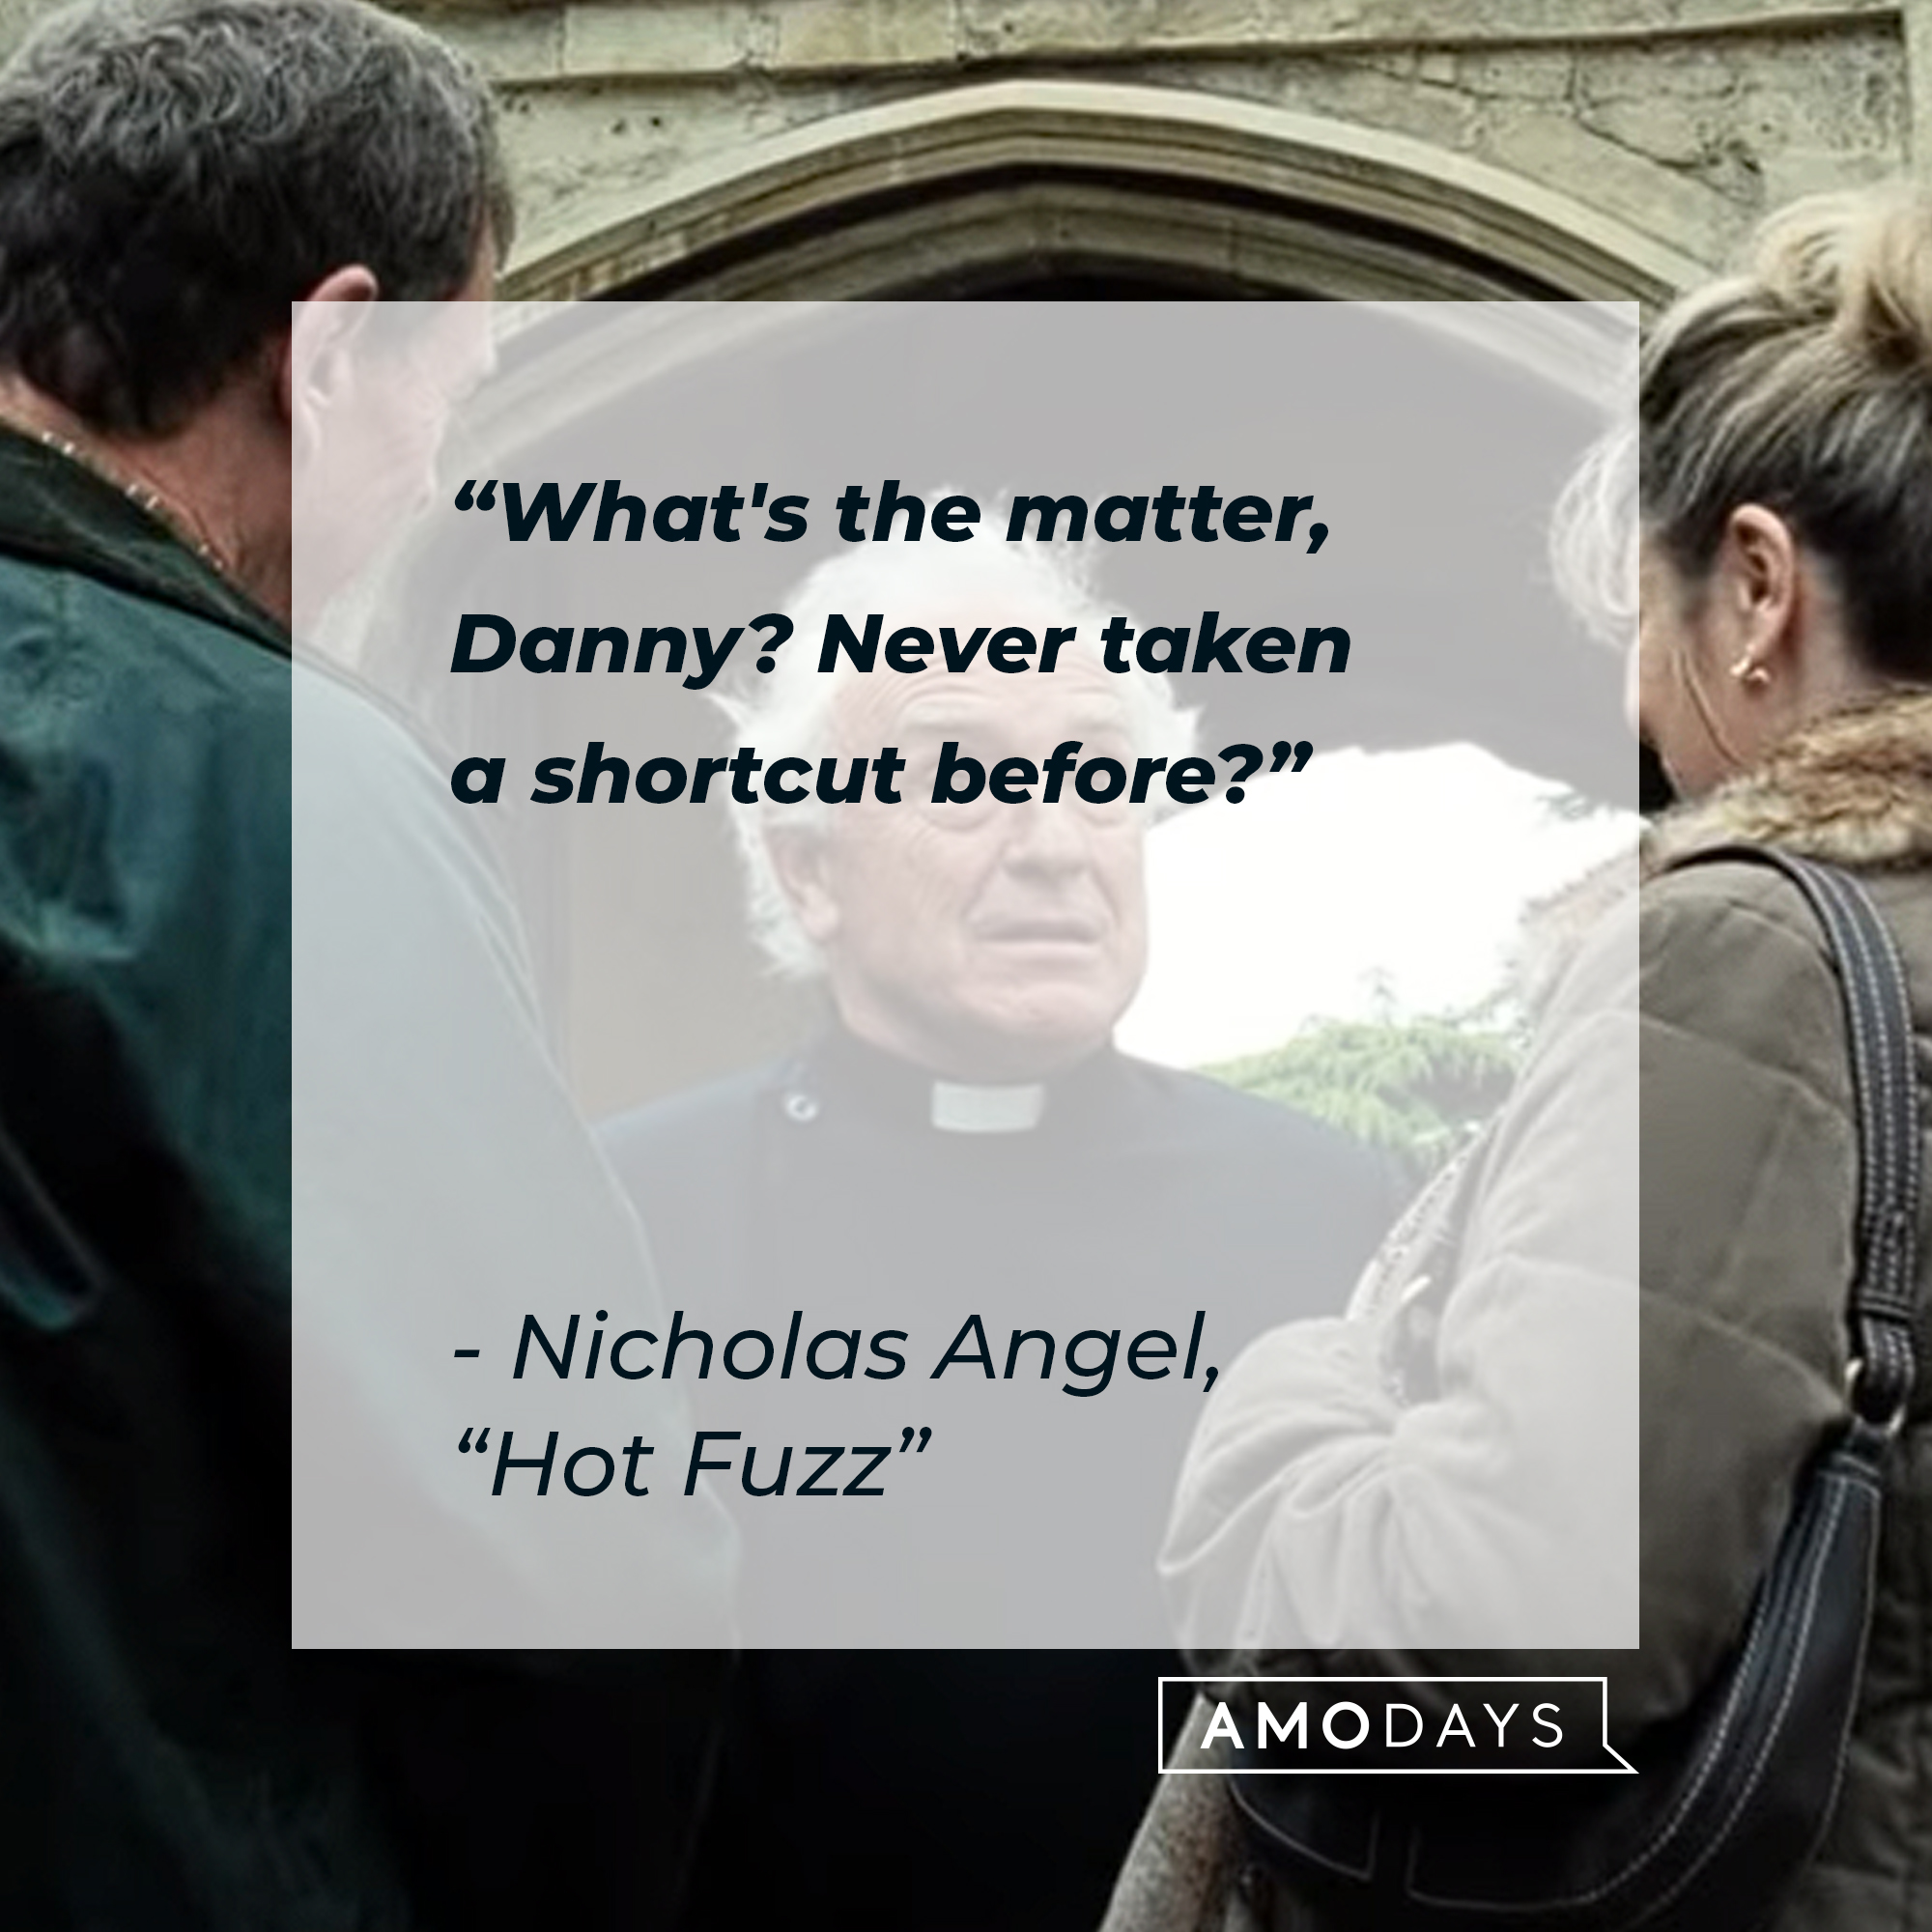 Nicholas Angel's quote in "Hot Fuzz:" “What's the matter, Danny? Never taken a shortcut before?” | Source: Youtube.com/UniversalPictures